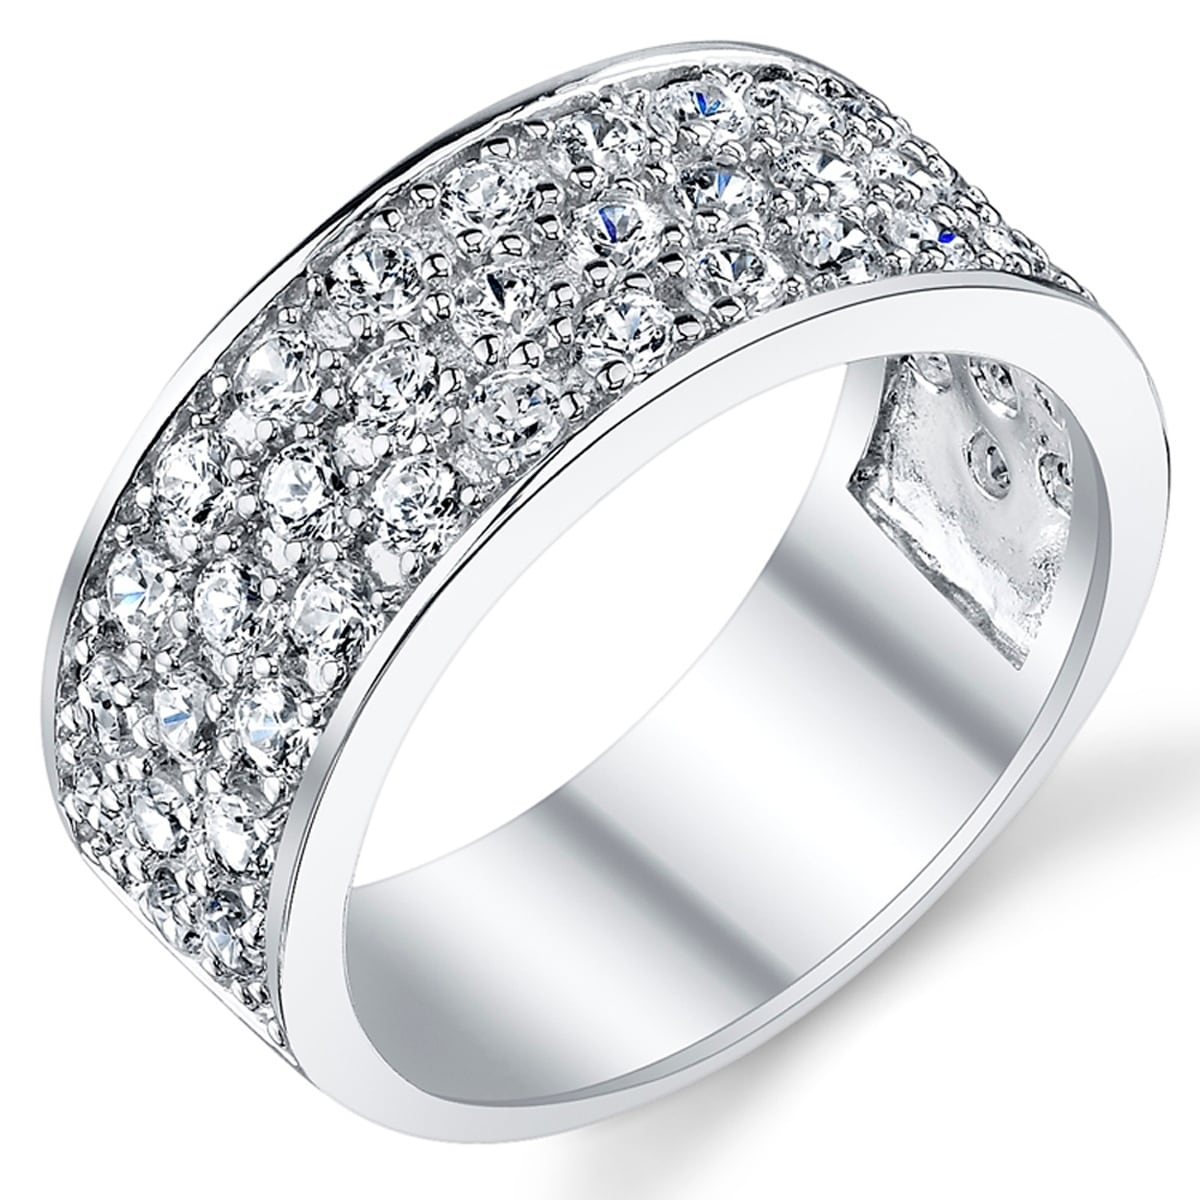 Available in Sizes 8 to 13 size 9 Sterling Silver 3.0 Carat Size Princess Cut Cubic Zirconia Mens Ring 